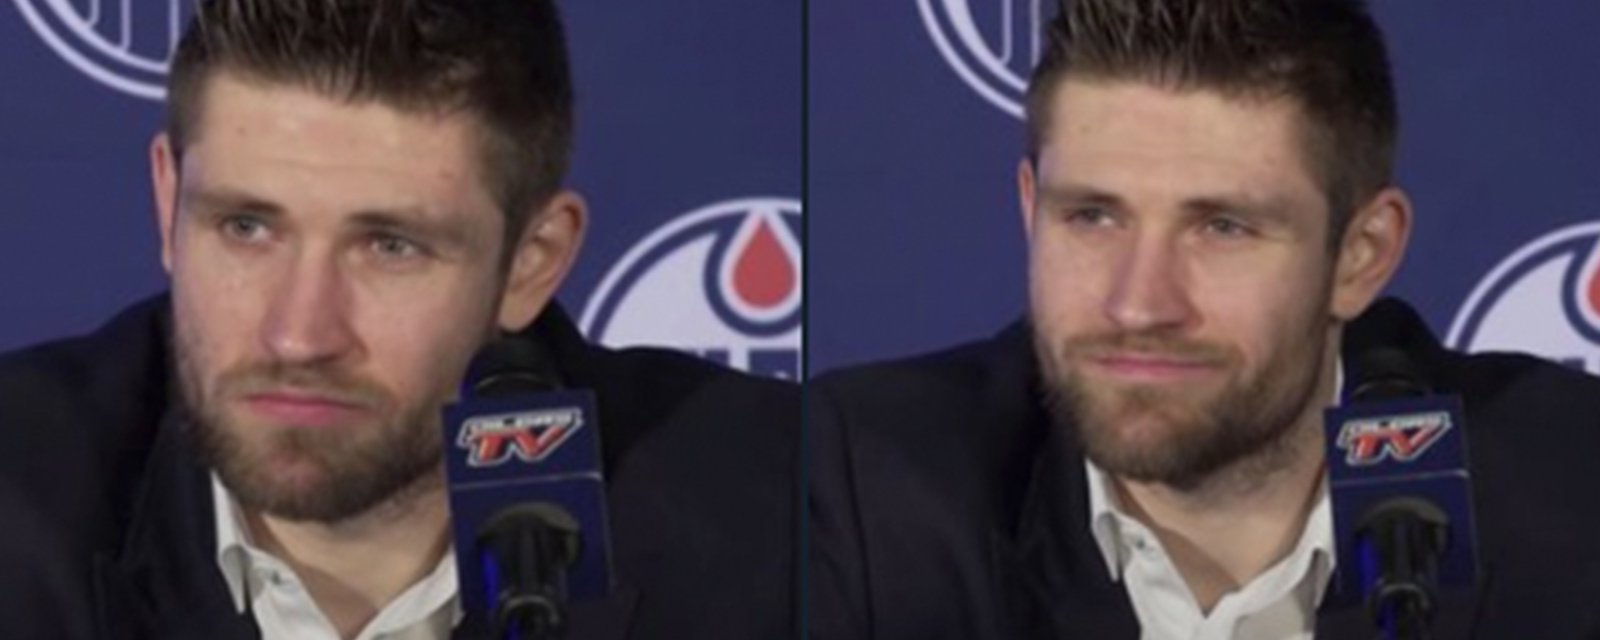 Draisaitl dunks on Edmonton media after ridiculous question following blowout loss to Leafs